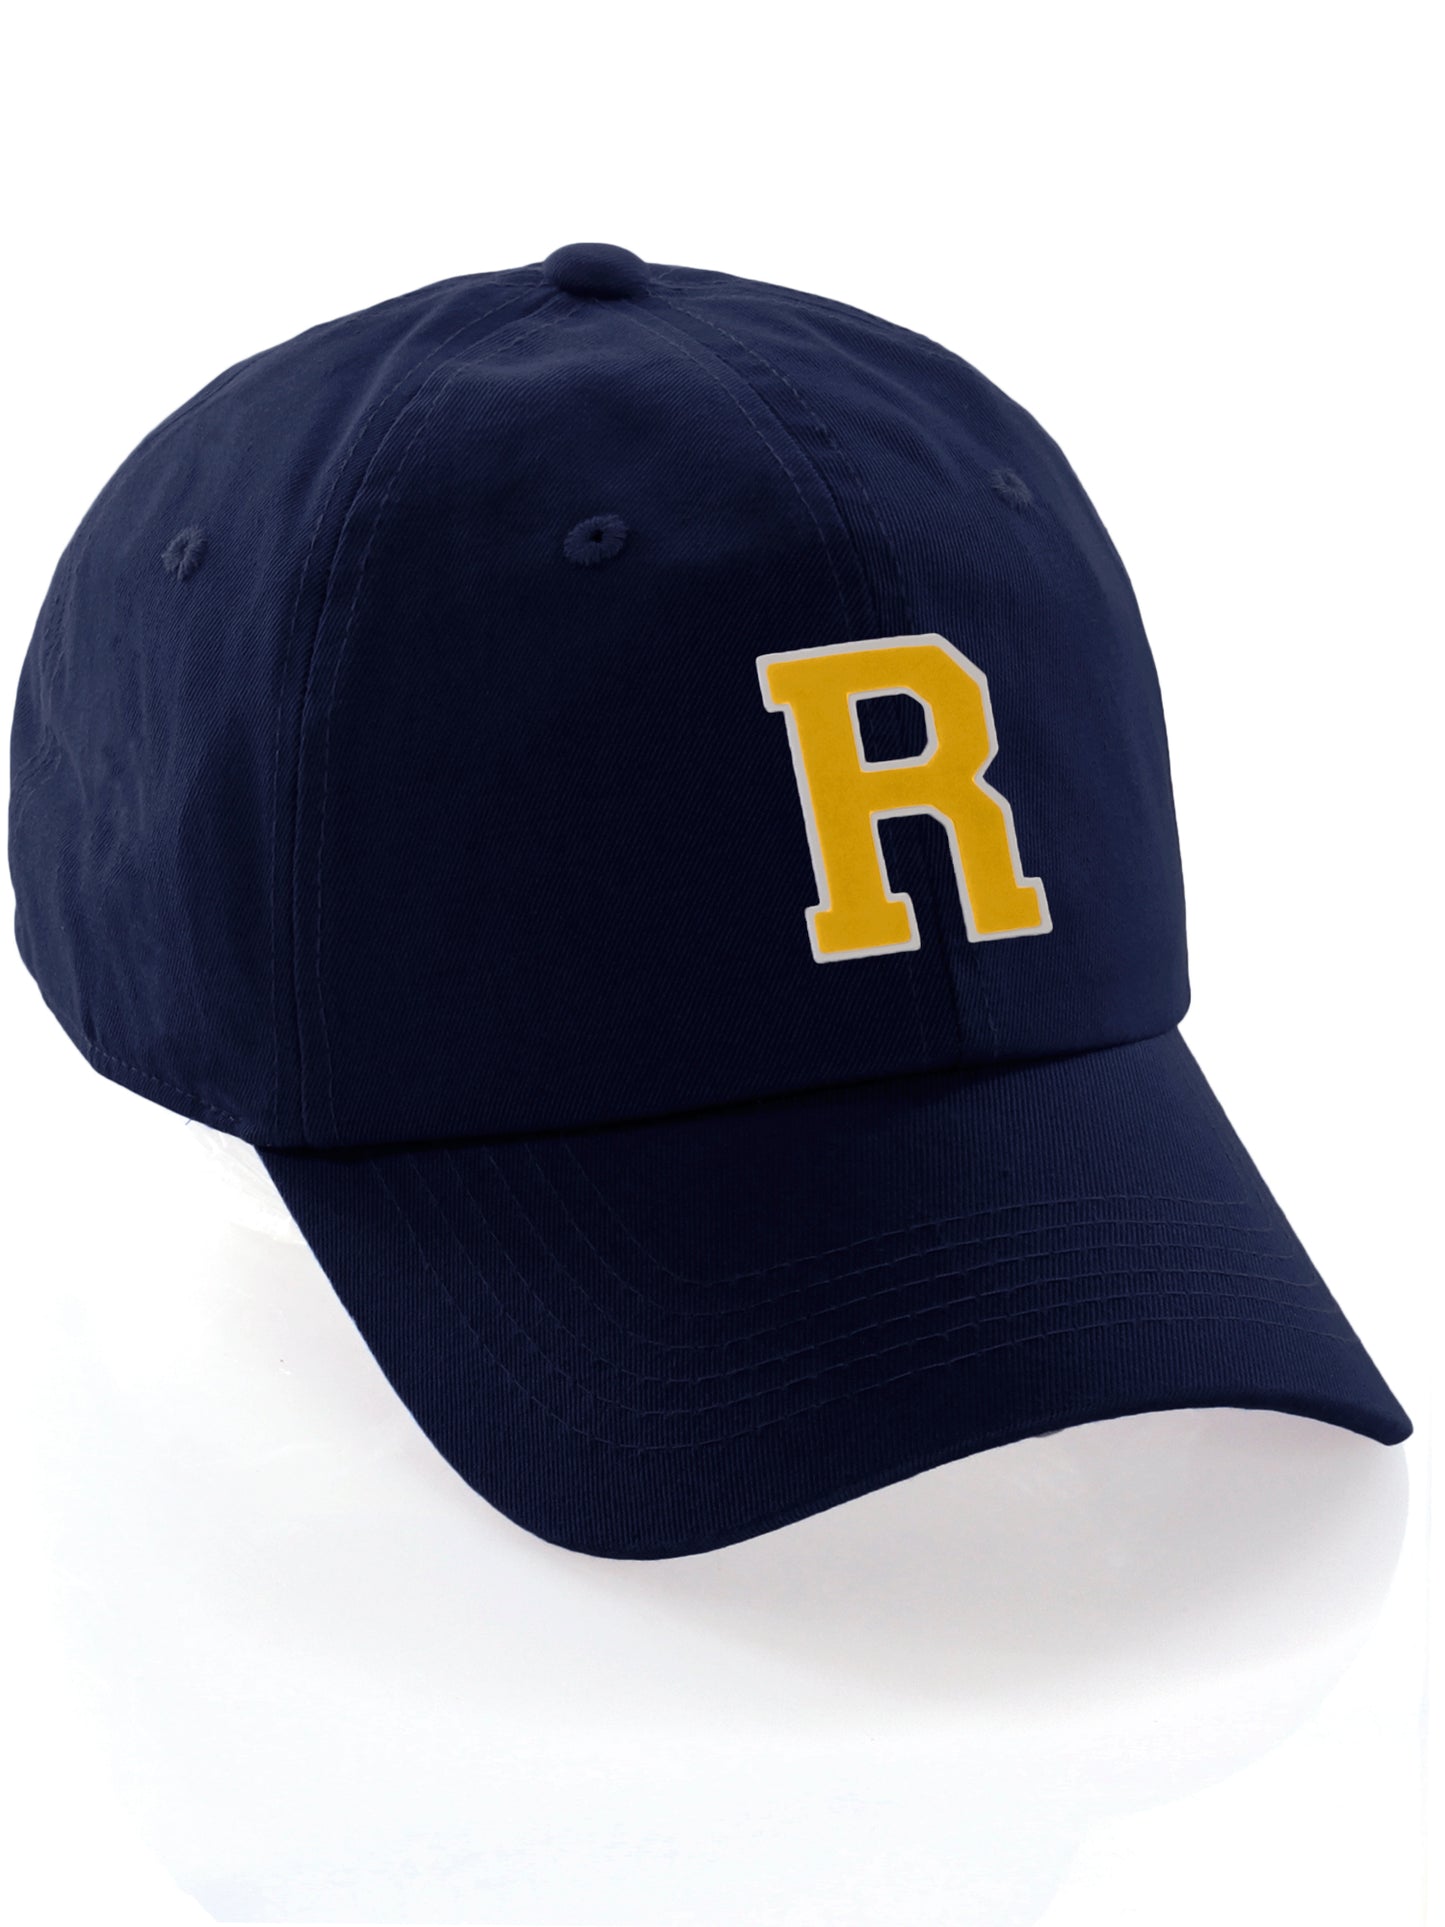 I&W Hatgear Customized Letter Initial Baseball Hat A to Z Team Colors, Navy Cap White Gold